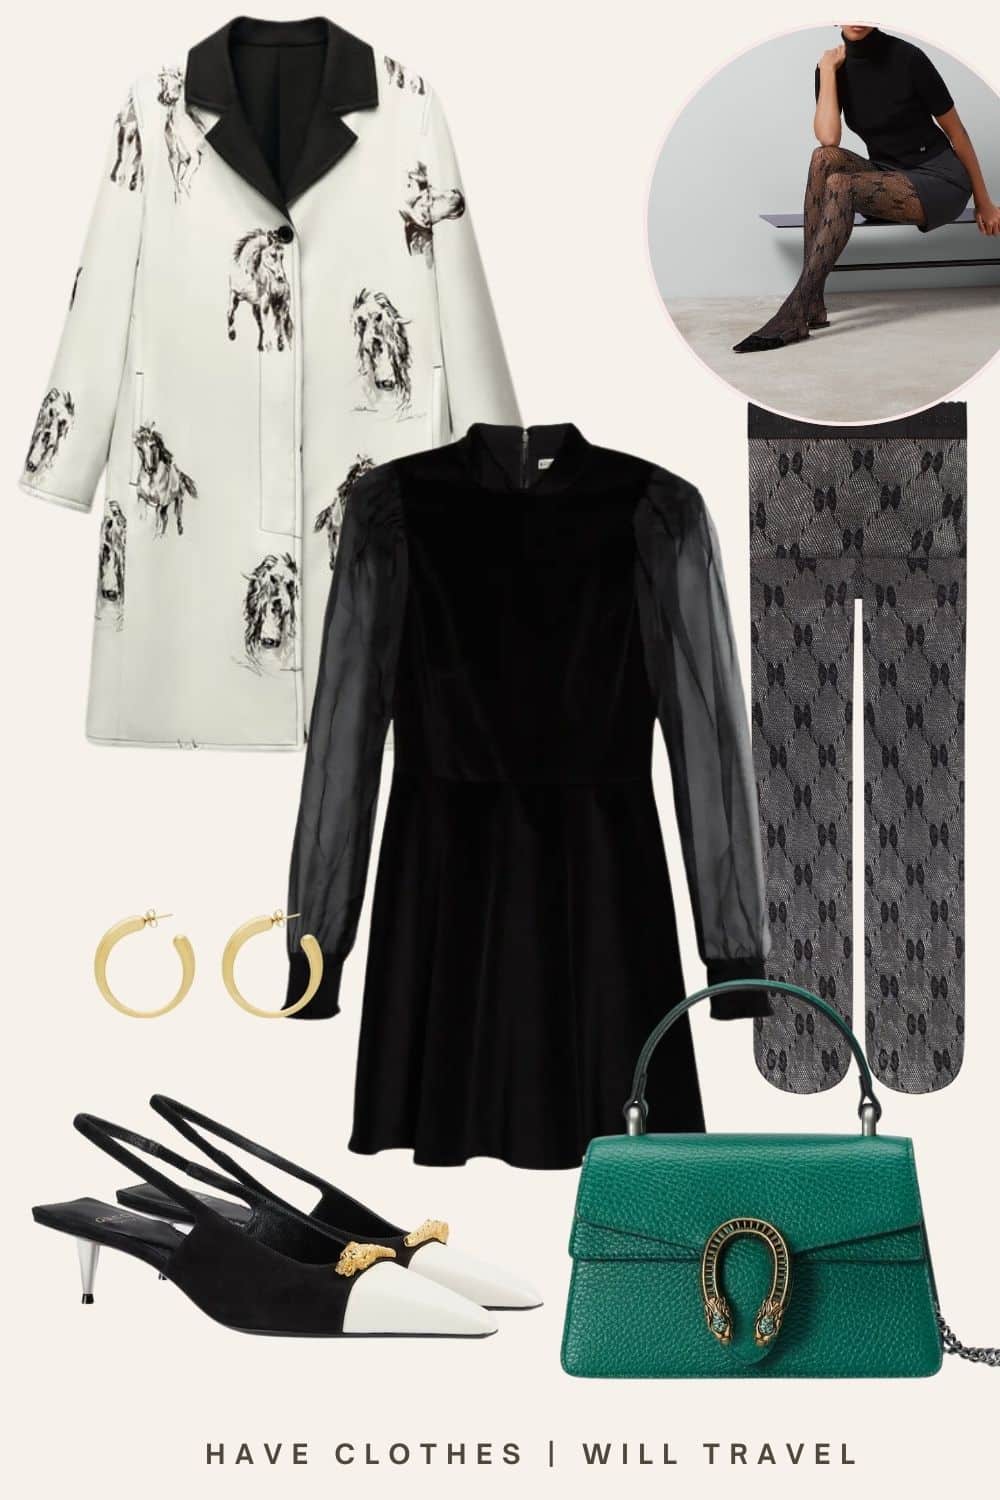 A black dress outfit featuring a white coat, patterned tights, sling back heels and green Gucci bag